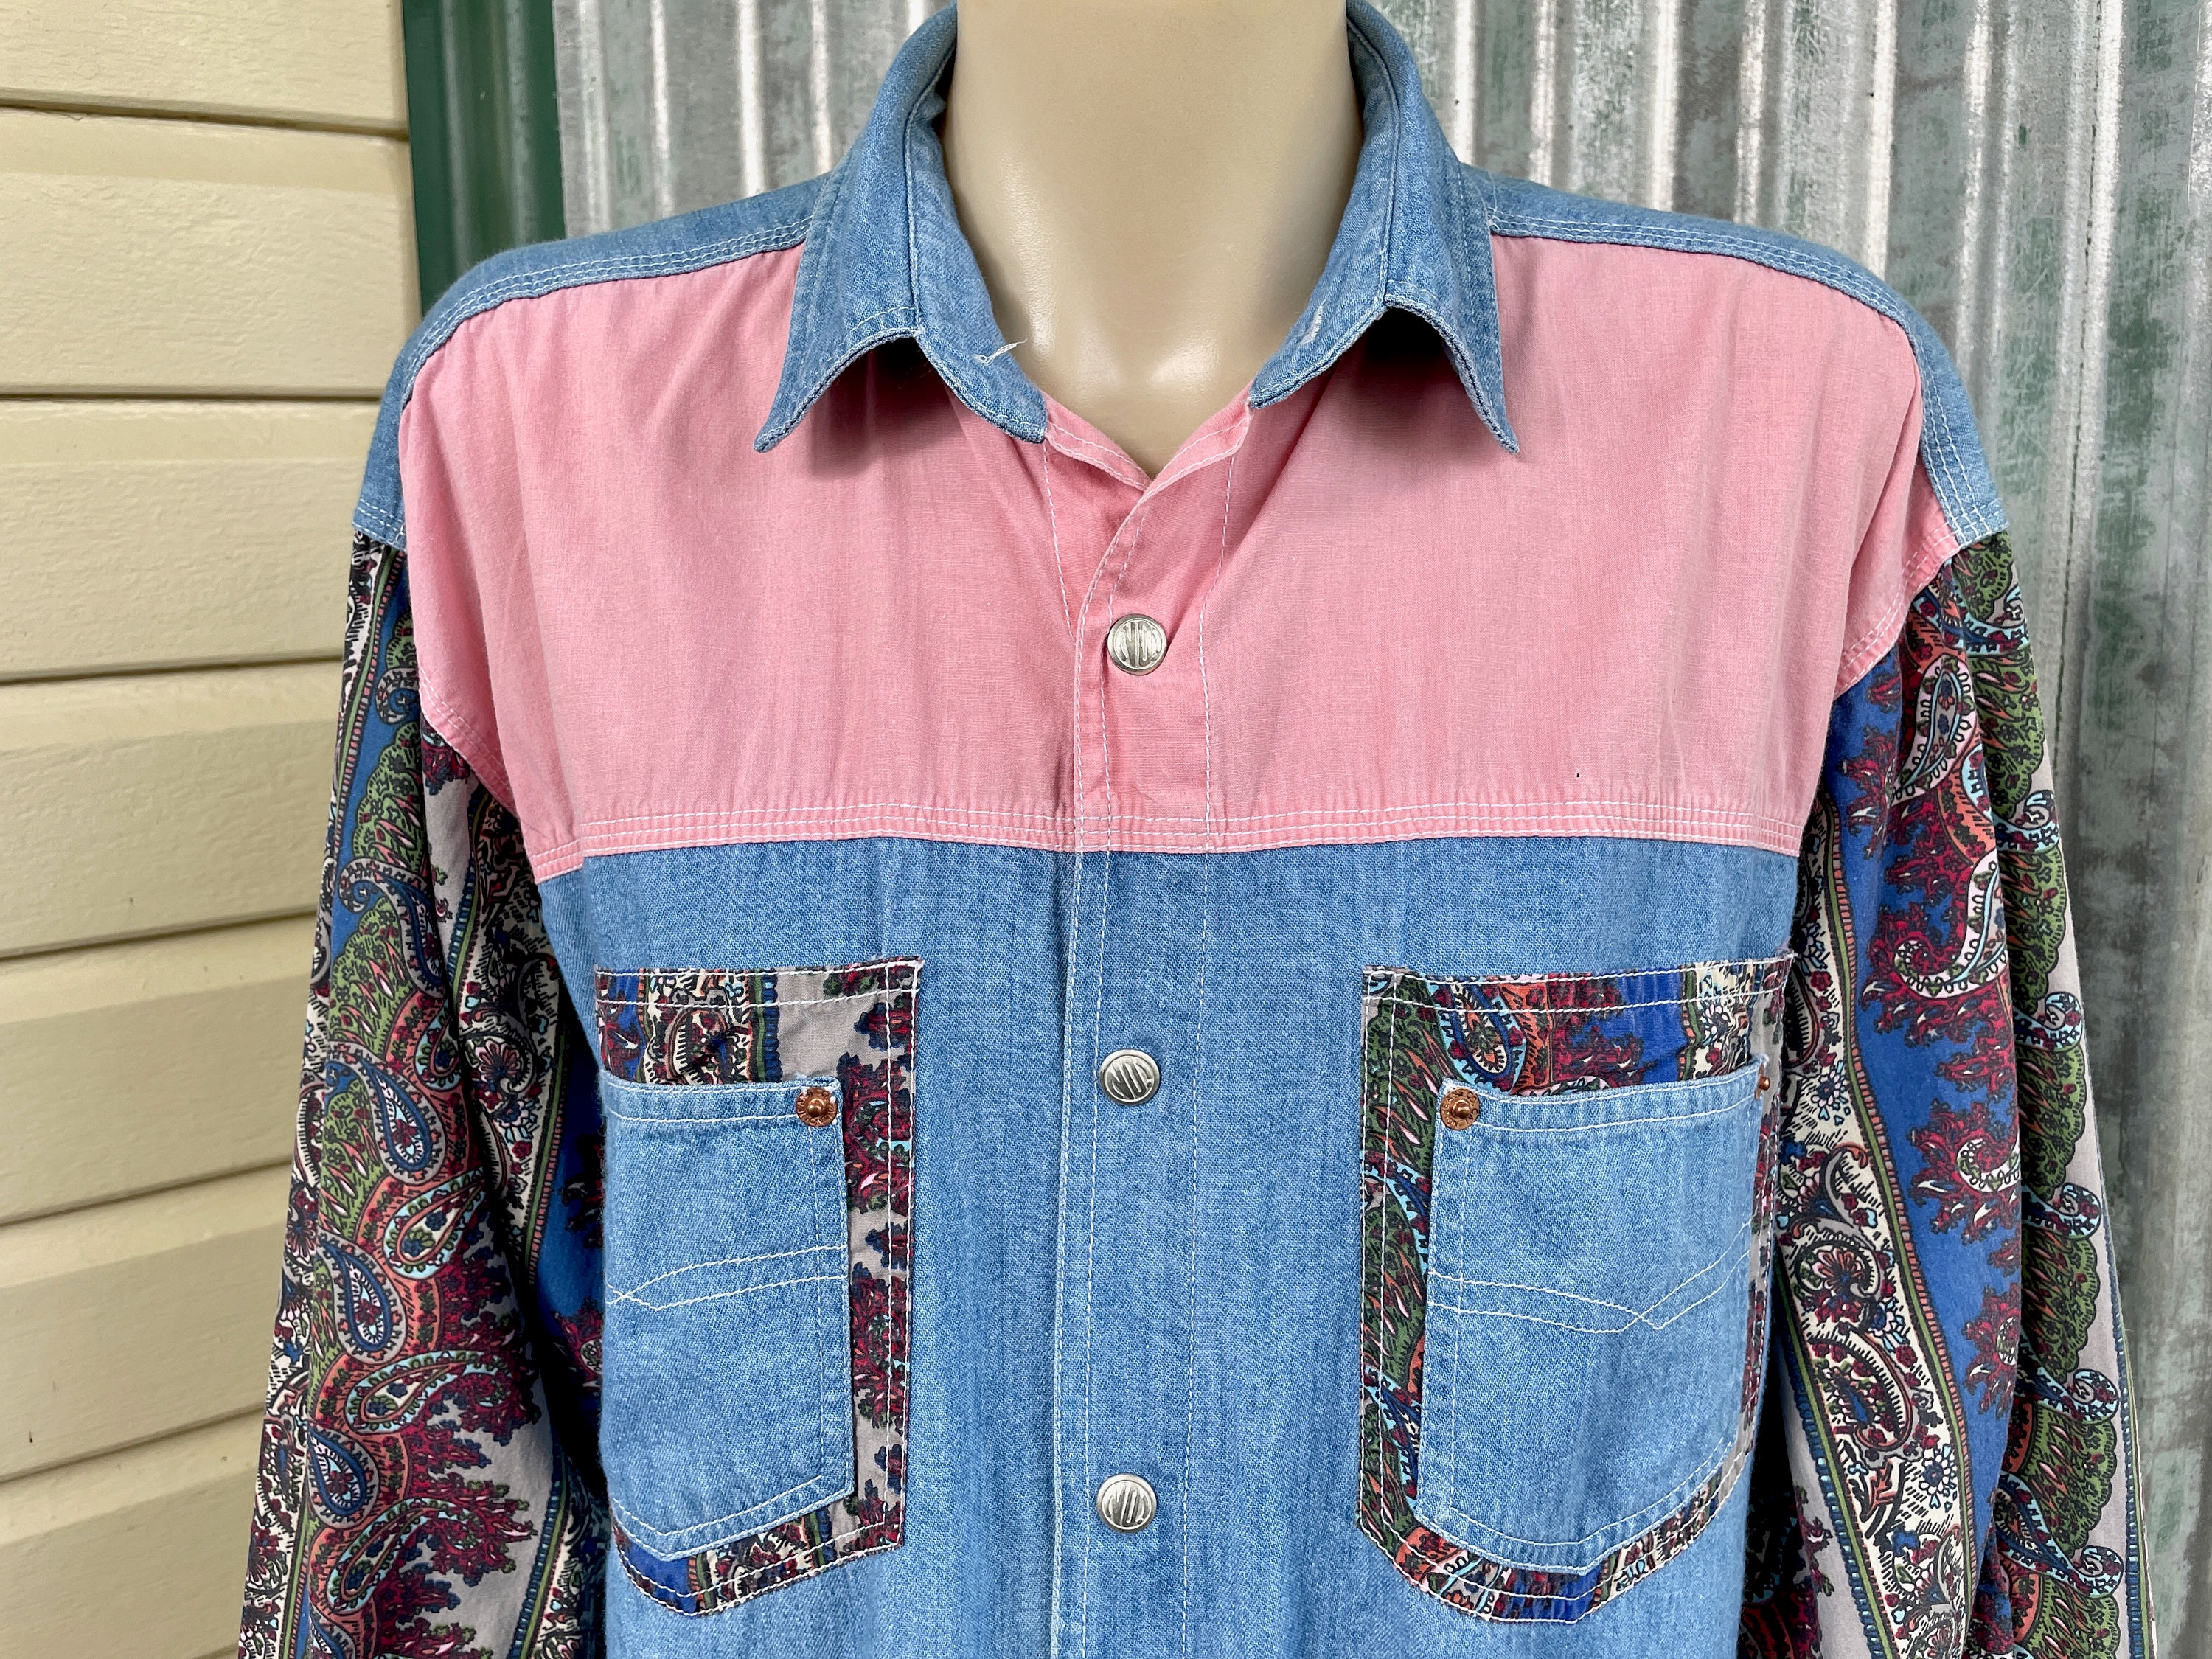 Vintage Pink Western Shirt, Pink Western Shirt With Pearl Snaps, Custom  Made Pink Western Shirt, Womens Large/mens Medium Pink Western Shirt 